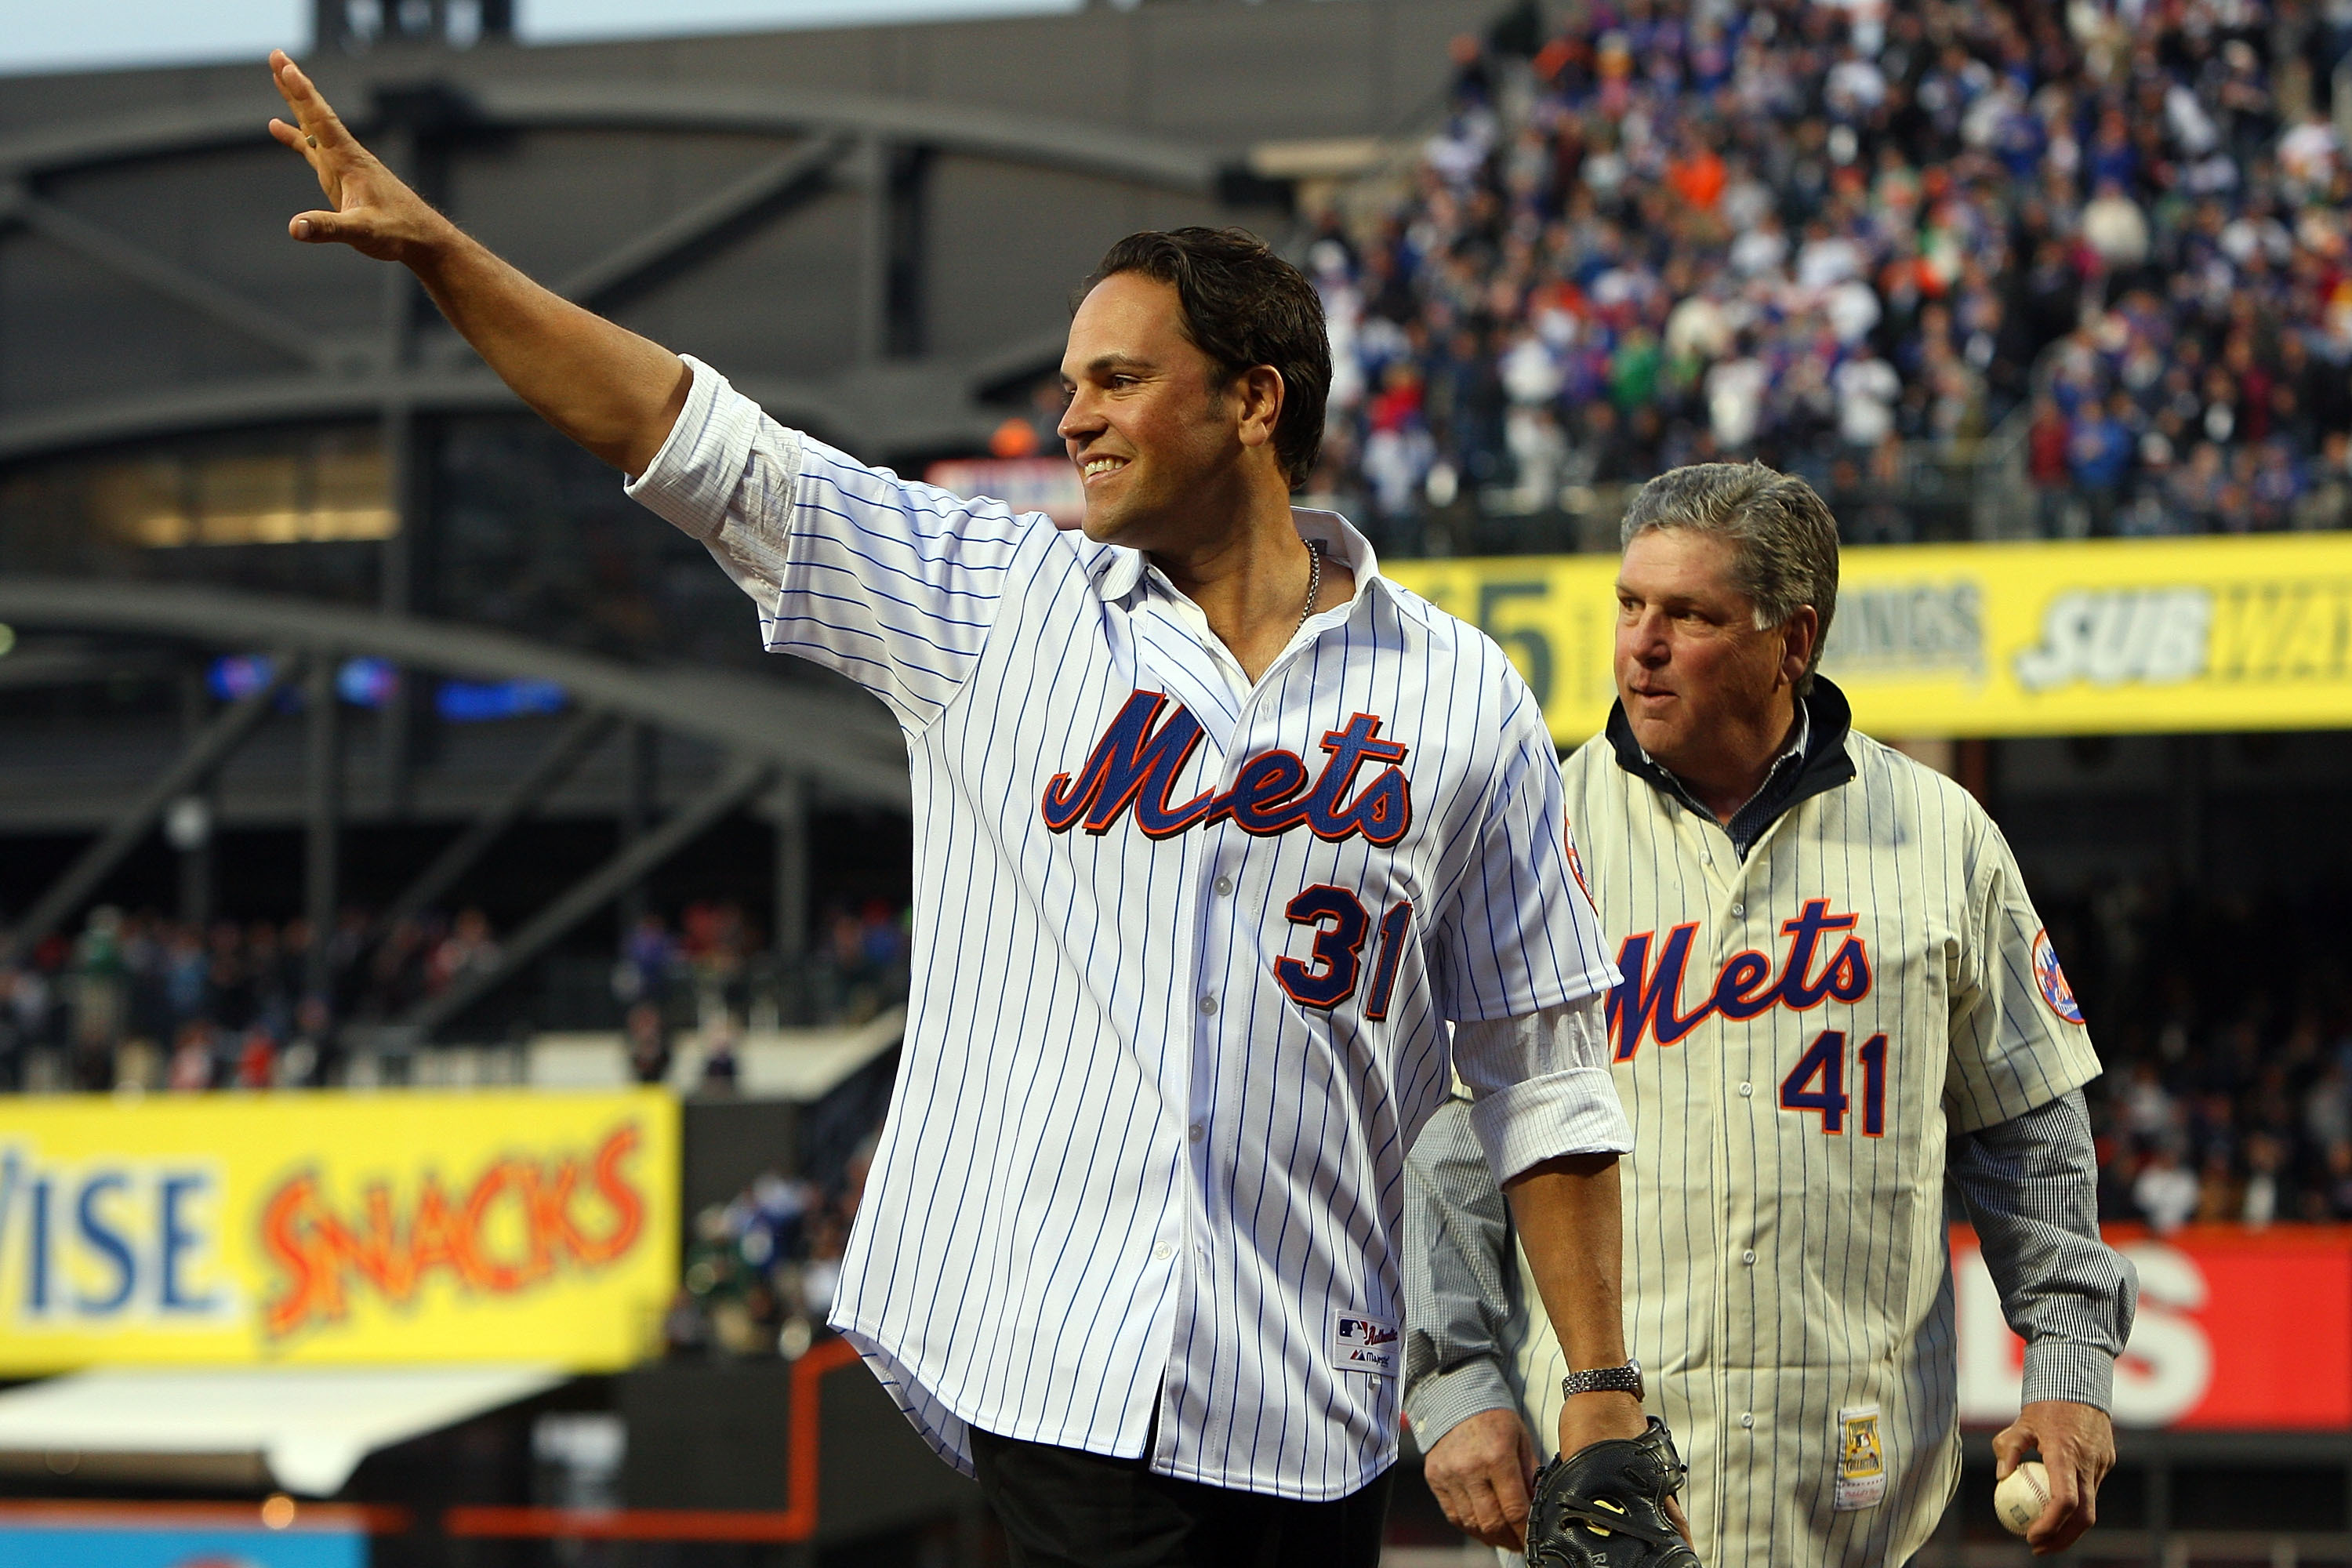 The Mets Celebrate a Memorable Mike Piazza Moment - The New York Times